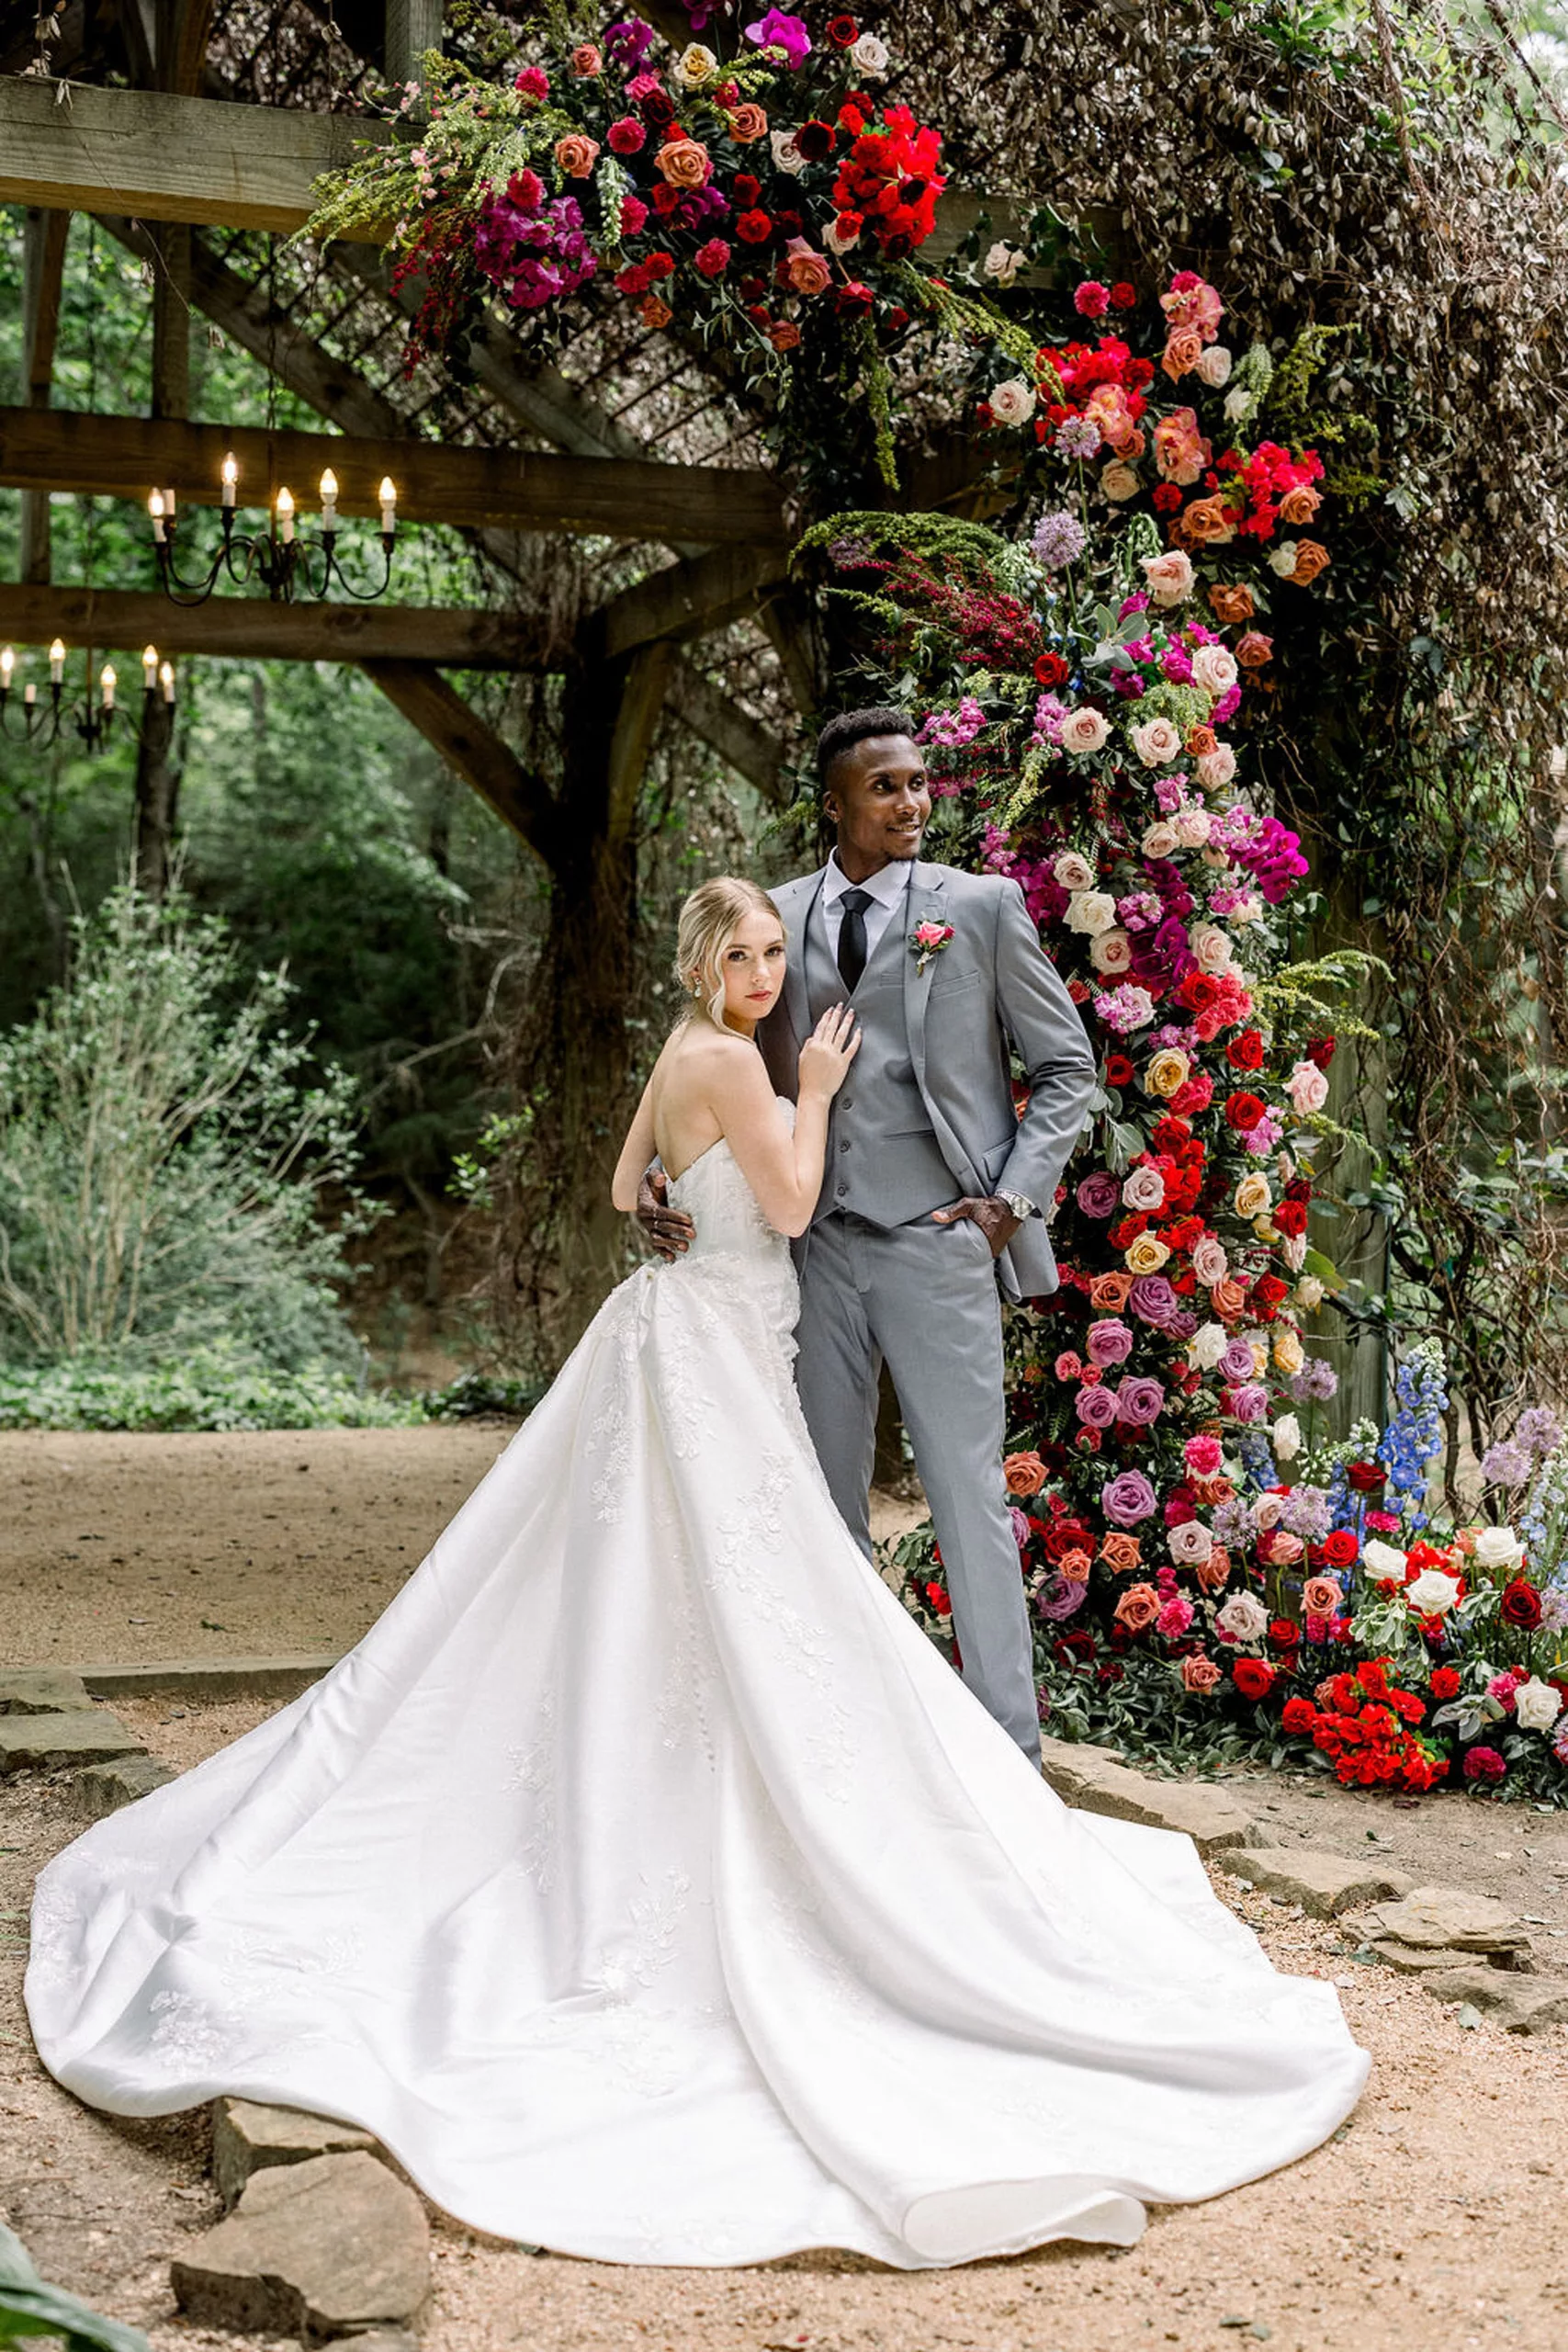 A groom stands under a wall of roses with his bride leaning onto him with her hand on his chest and her train spread over the gravel path at the iron manor wedding venue